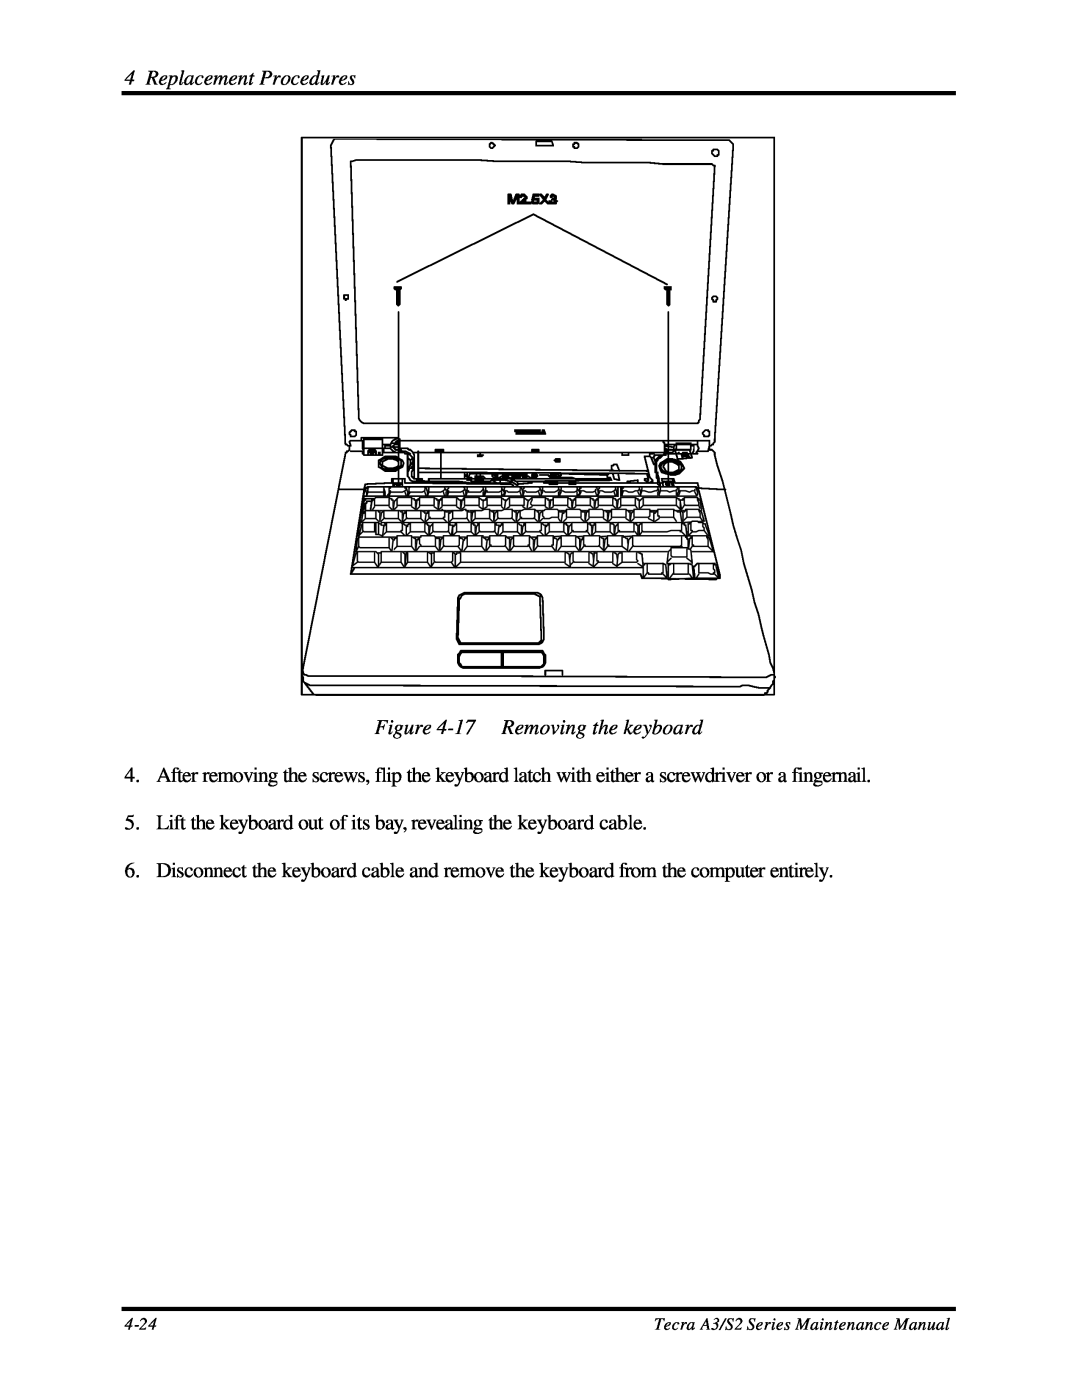 Toshiba S2 manual 17 Removing the keyboard, Replacement Procedures 